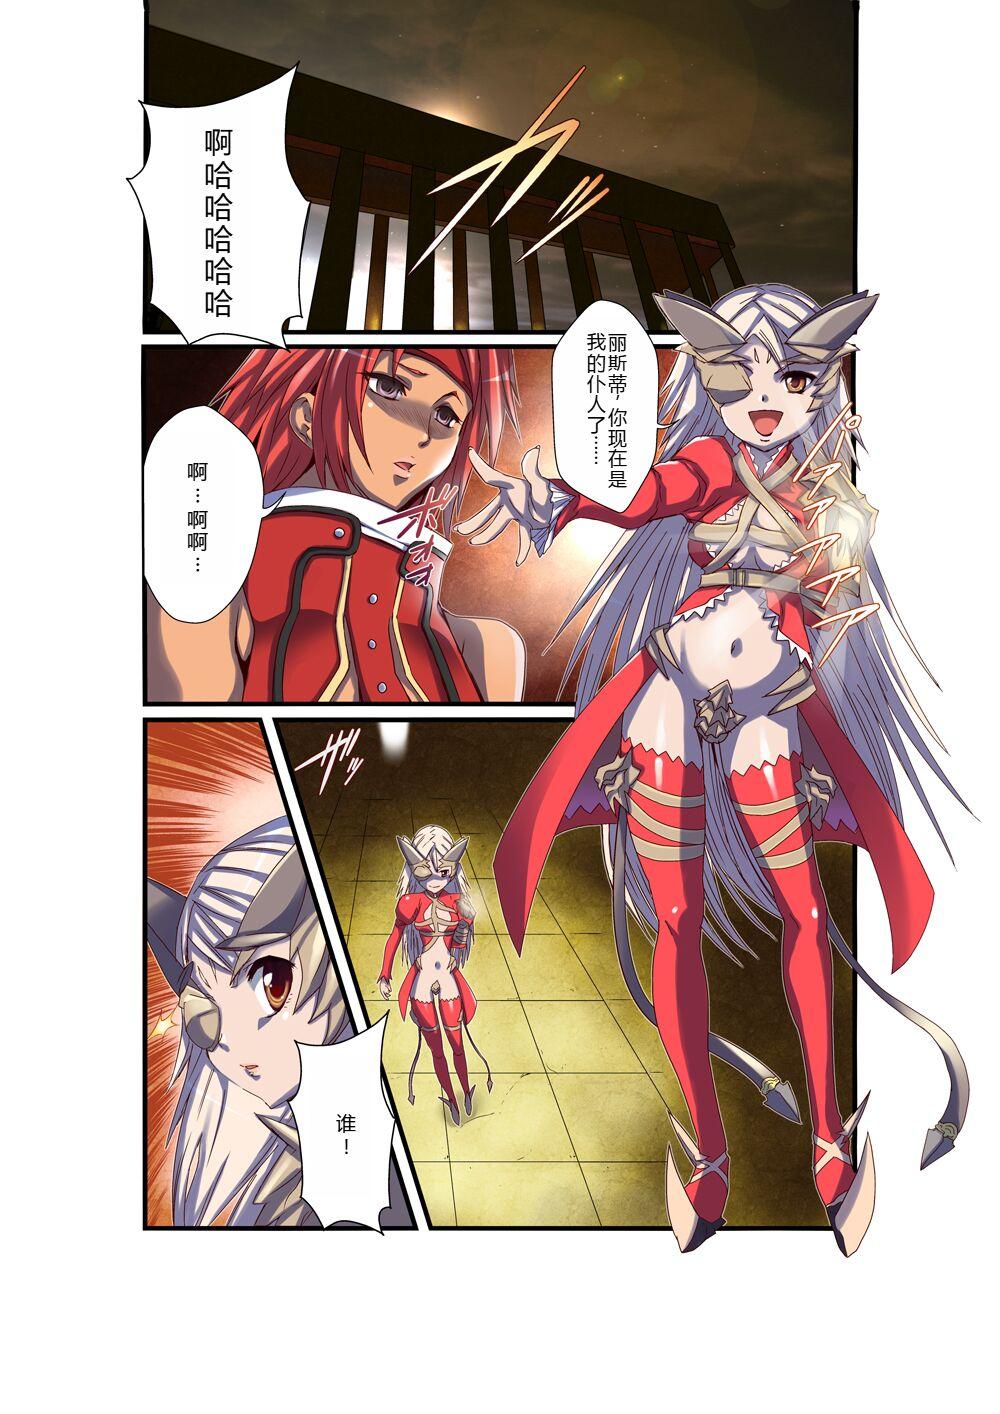 Ftv Girls Queen's *lade Mind-control Manga - Queens blade Cum In Mouth - Page 1